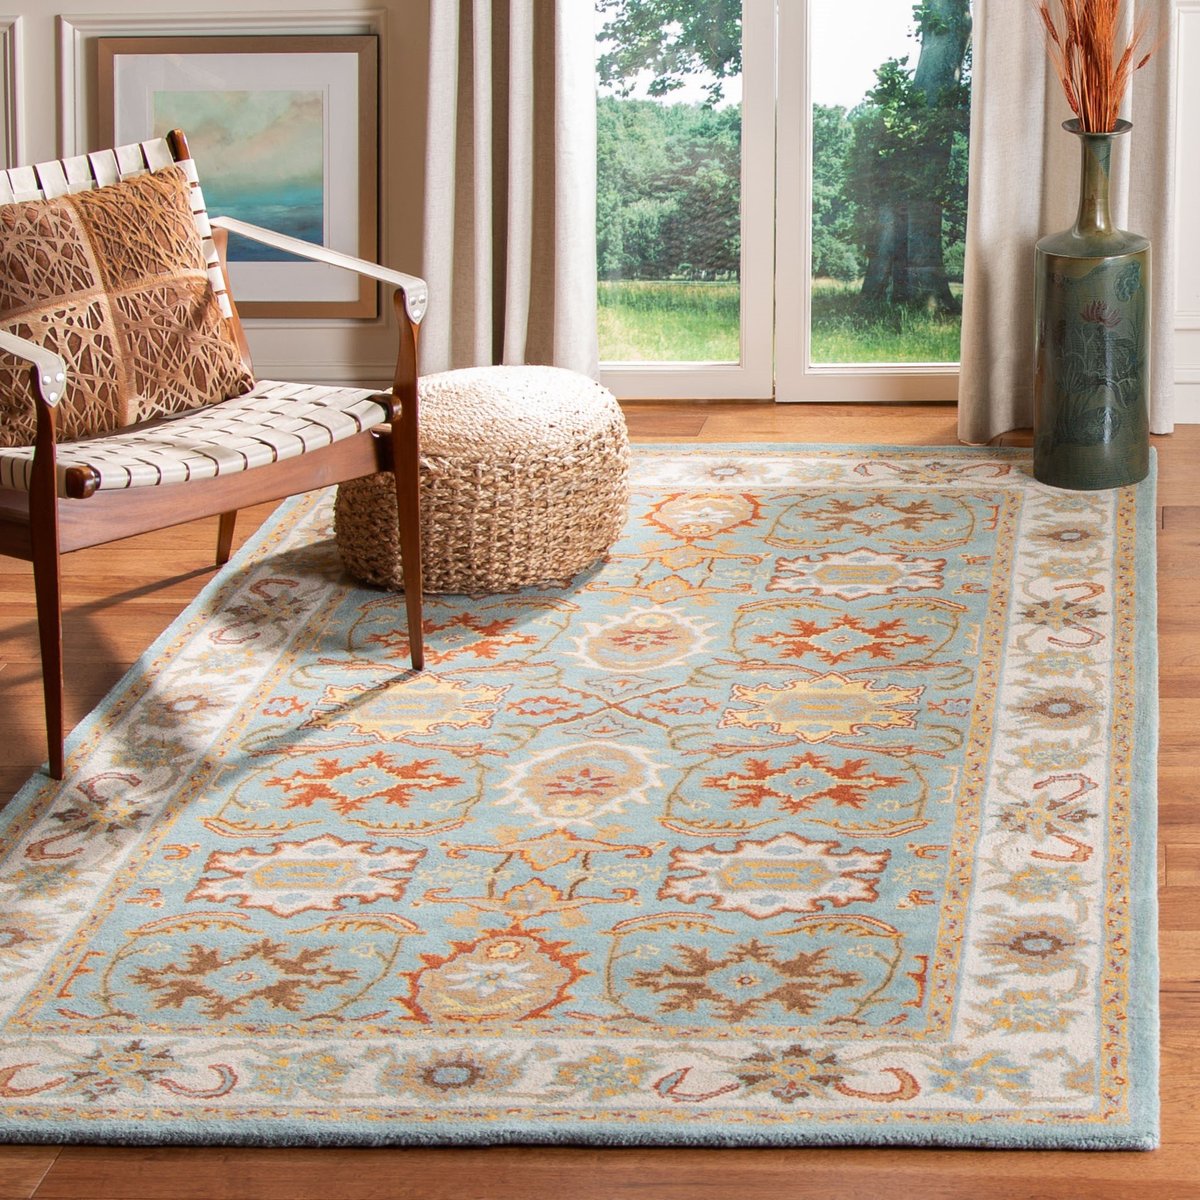 Modern Oushak Bordered Yellow Rug 4'11 x 7'10 Bedroom eCarpet Gallery Area Rug for Living Room 362033 Hand-Knotted Wool Rug 